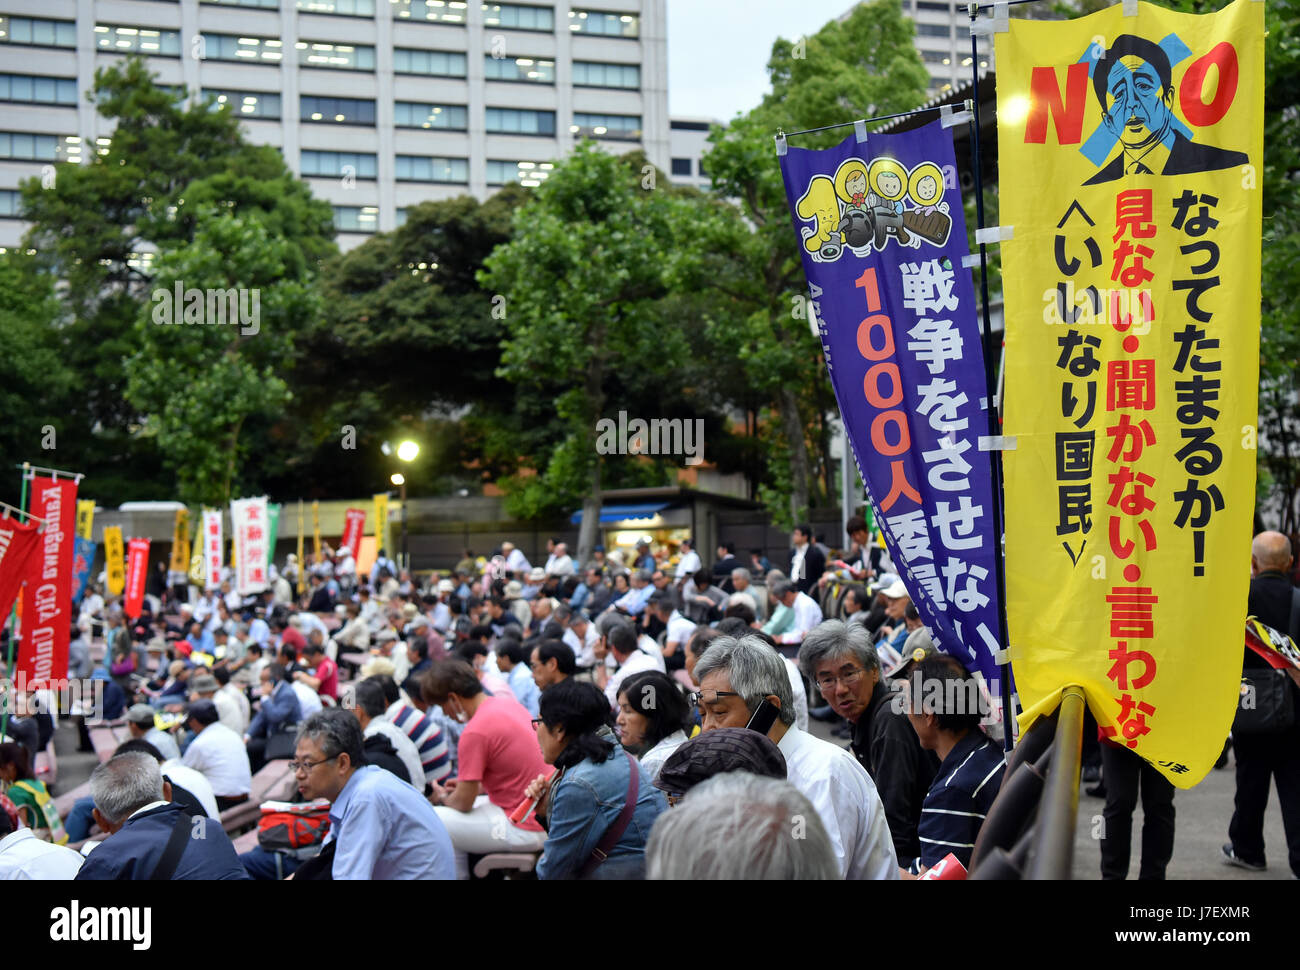 May 24, 2017, Tokyo, Japan - Protesters rally at a park near the Diet building in Tokyo on Wednesday night, May 24, 2017, opposing the contentious conspiracy bill that was rammed through the Lower House by Prime Minister Shinzo Abe's ruling bloc the day before. The bill would revise the anti-organized crime law and is purportedly aimed at permitting law enforcement to crack down on people suspected of being terrorists who conspire to commit crimes. It is expected to cover as many as 277 crimes, and there is a concern that it could also be used to restrict freedom. (Photo by Natsuki Sakai/AFLO) Stock Photo